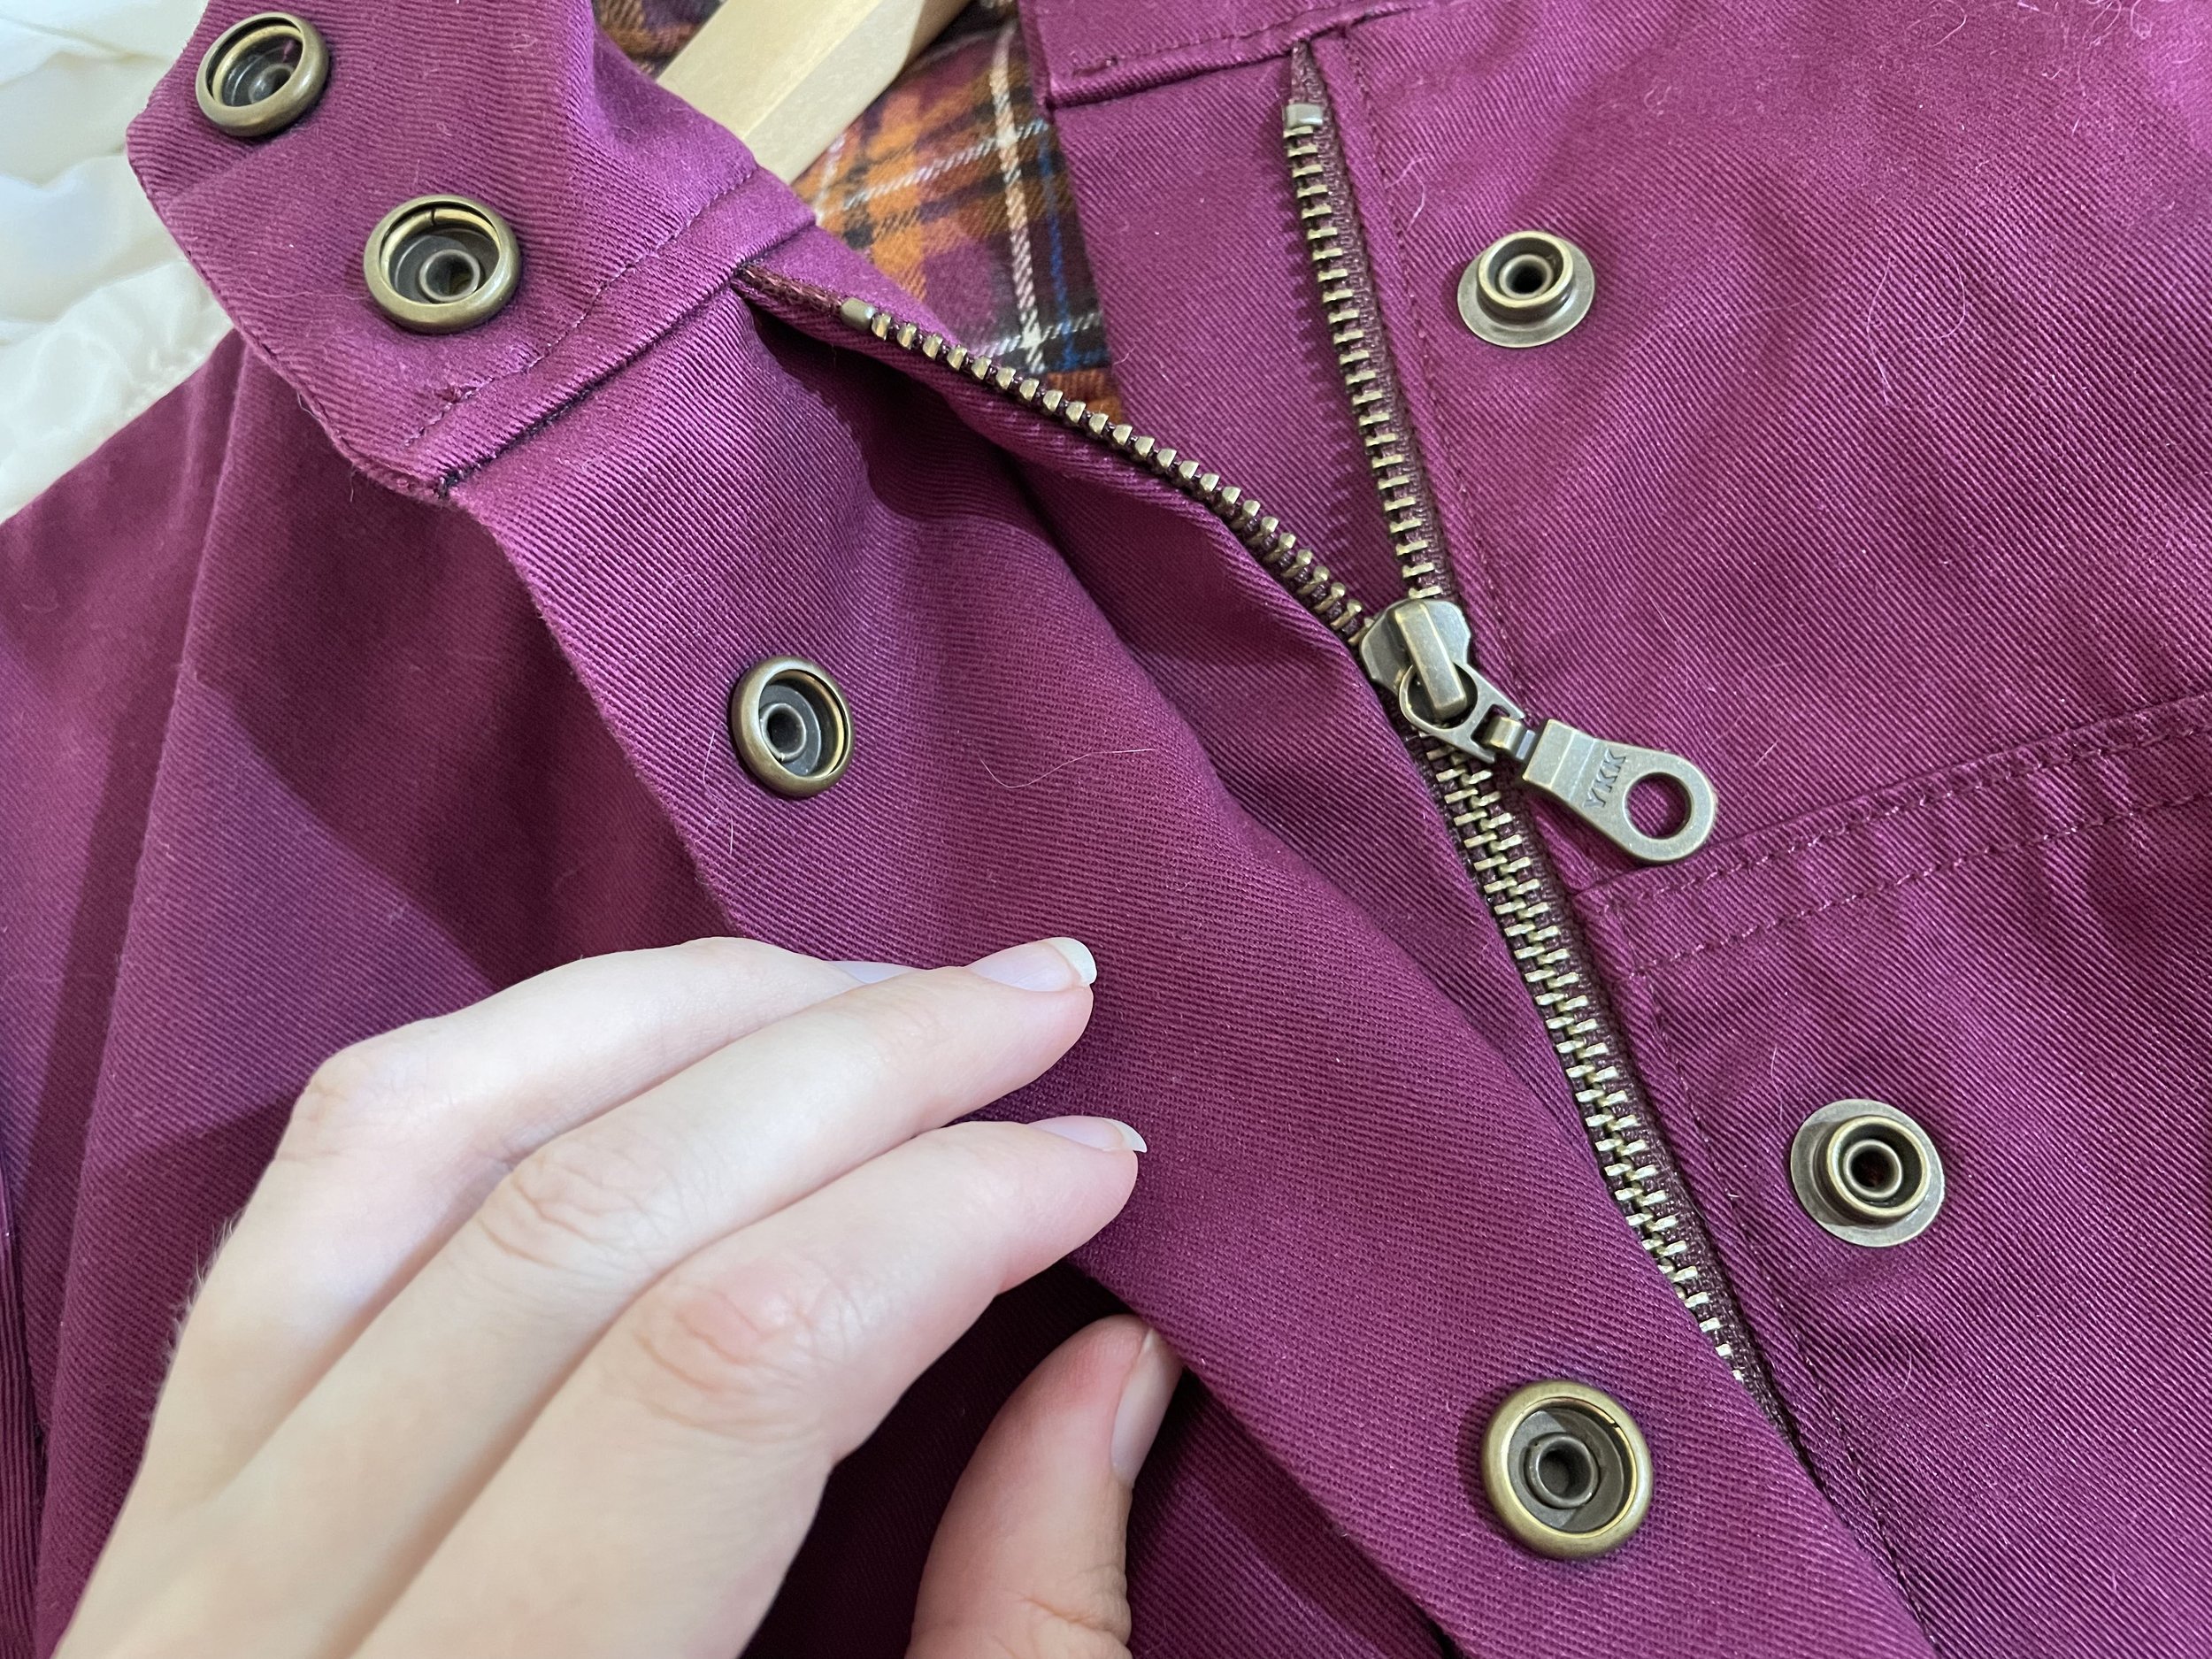 Sewing Snaps onto Garments 